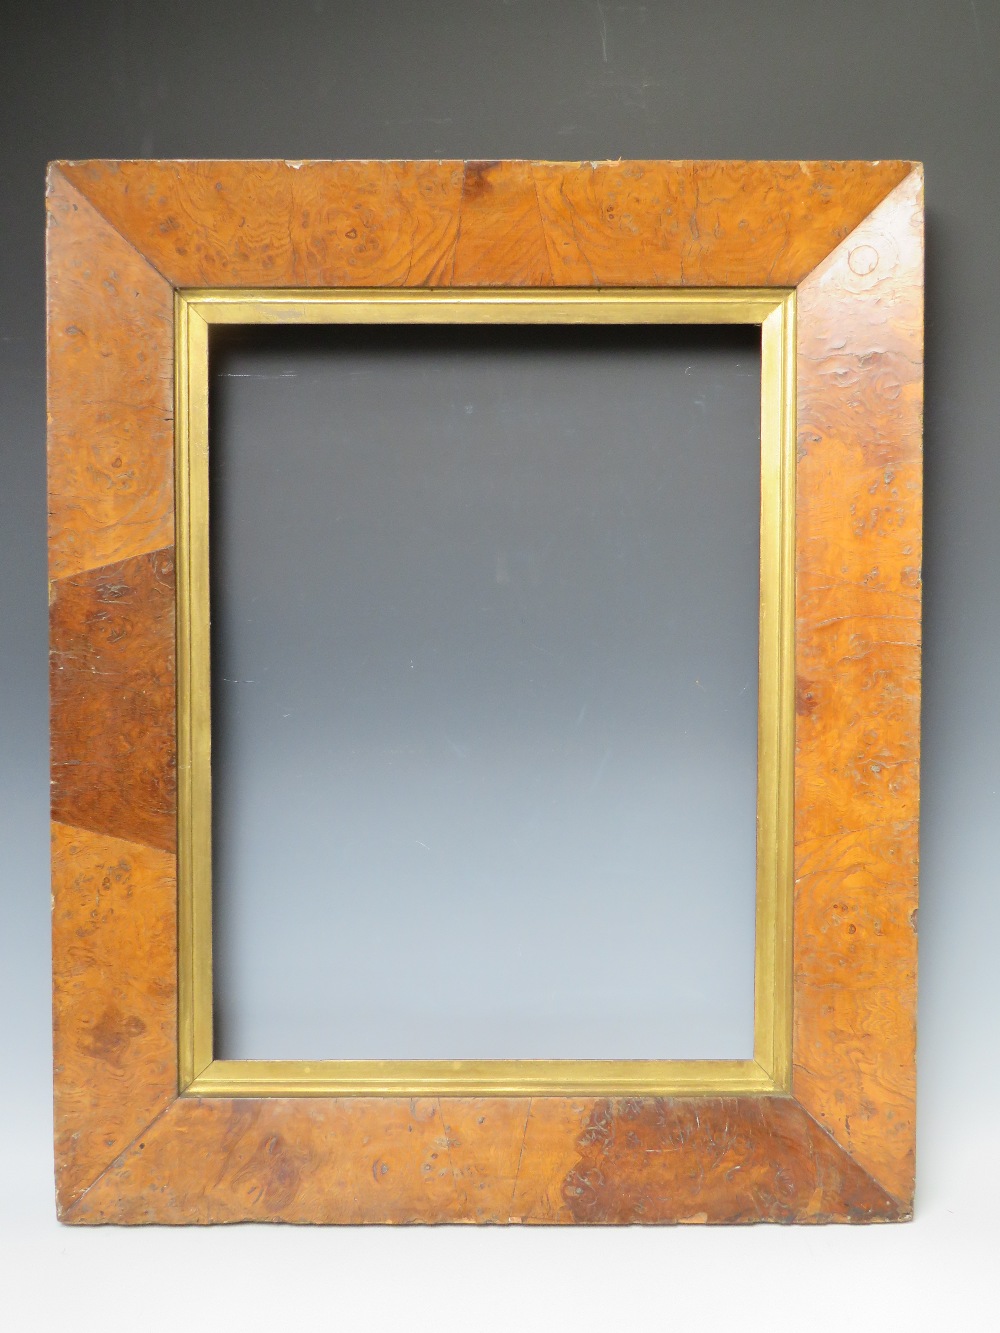 A LATE 18TH / EARLY 19TH CENTURY MAPLE FRAME, with gold slip, frame W 8 cm, rebate 57 x 44.5 cm